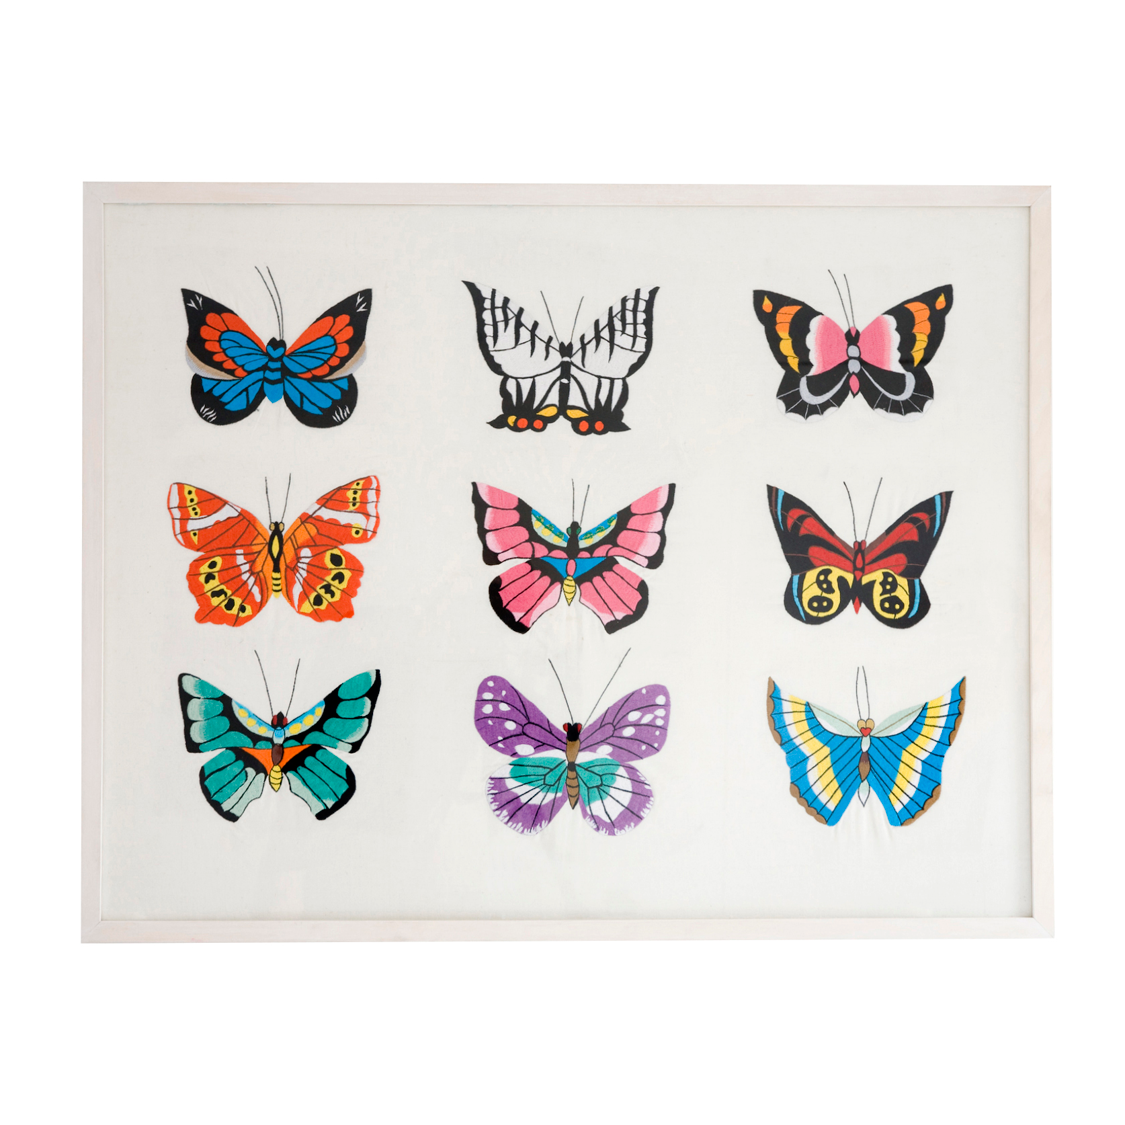 Butterfly wallhanging